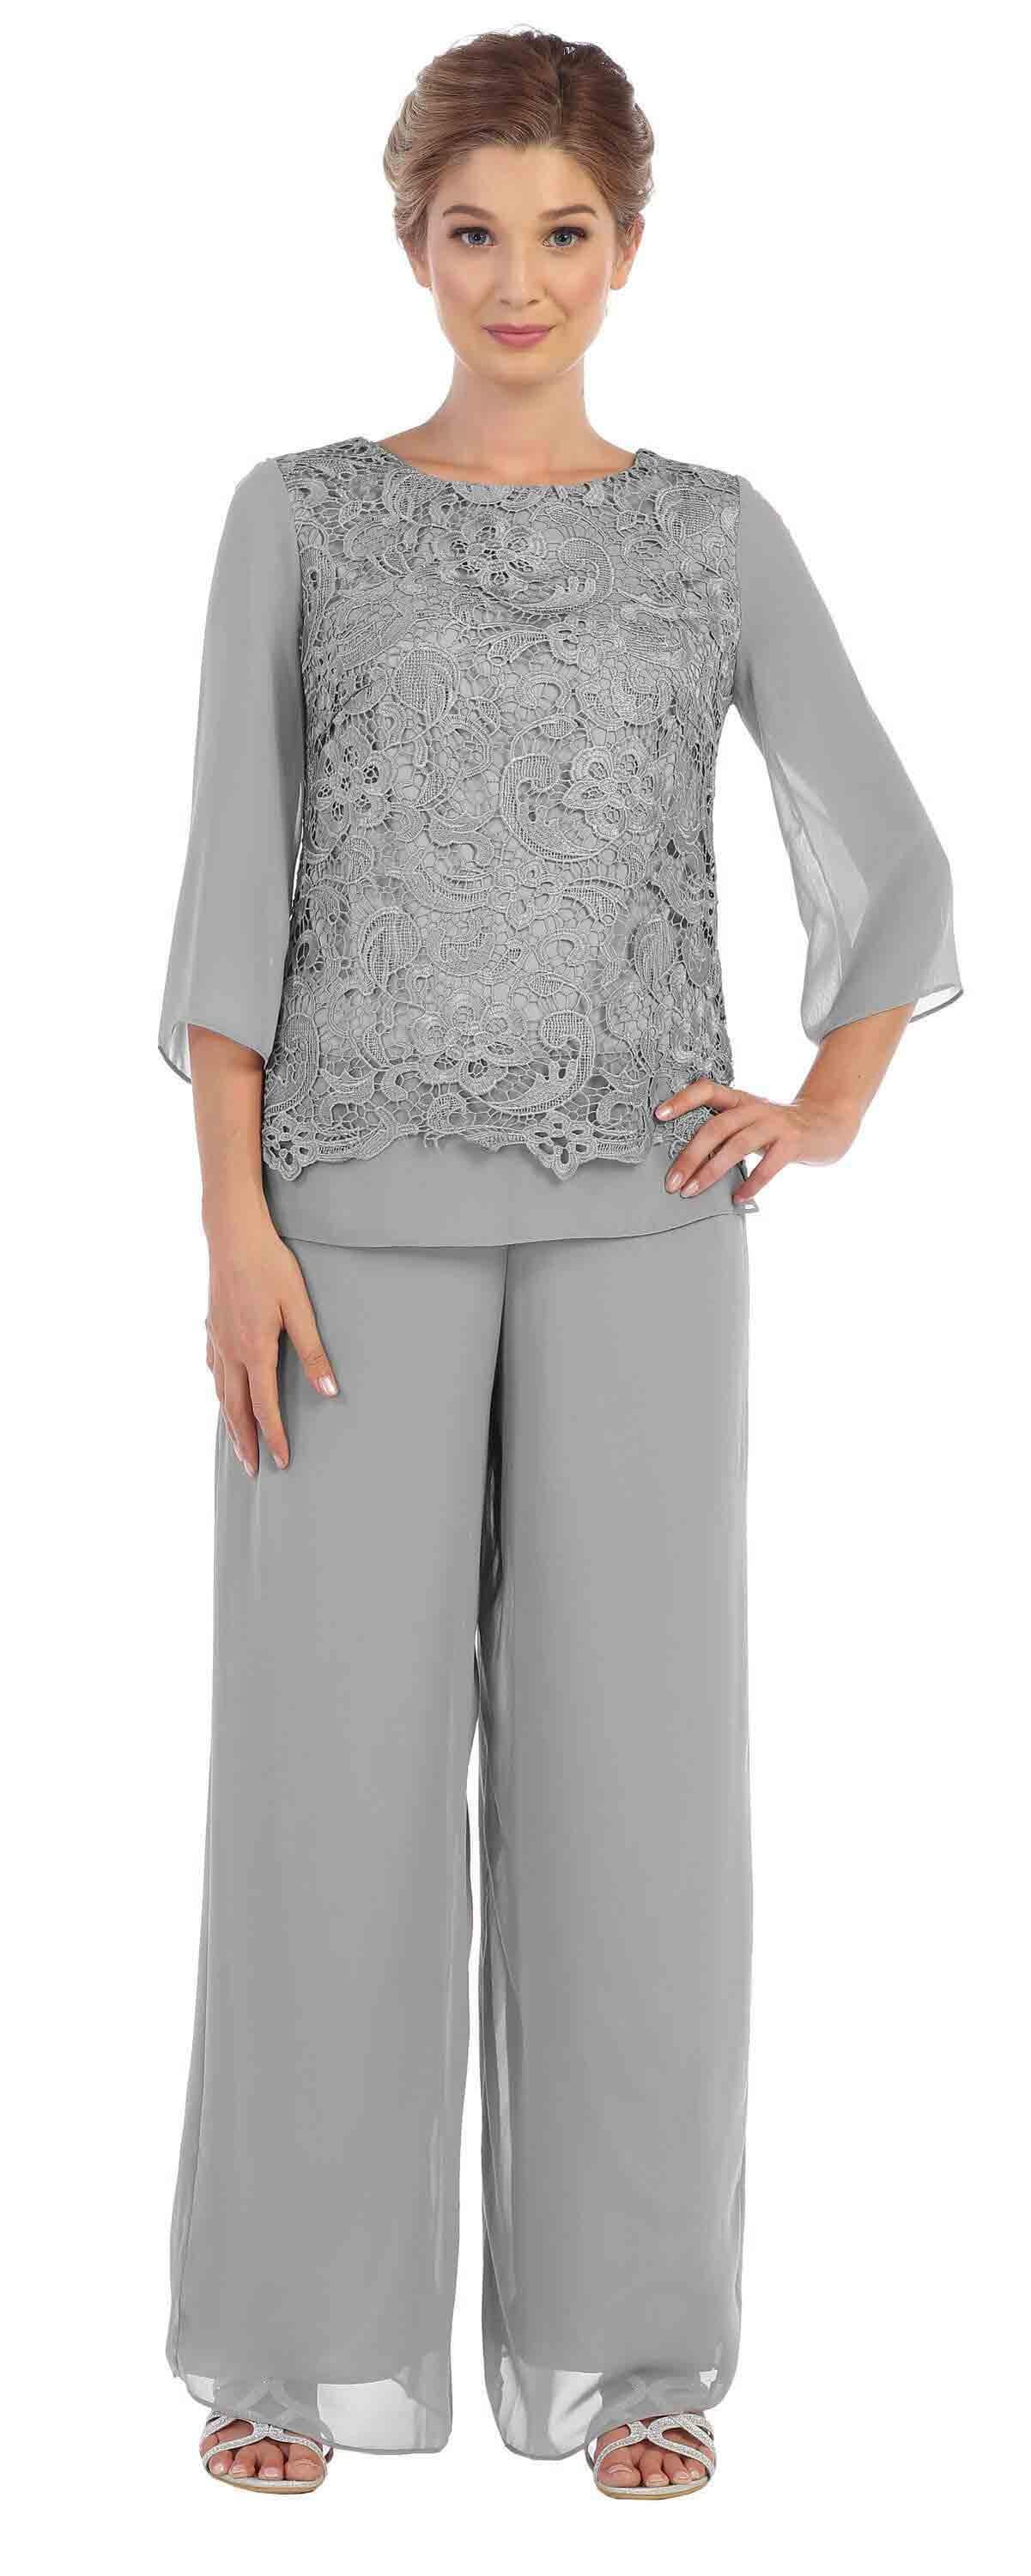 Formal 2 Piece Mother of the Bride Lace Pant Suit - The Dress Outlet